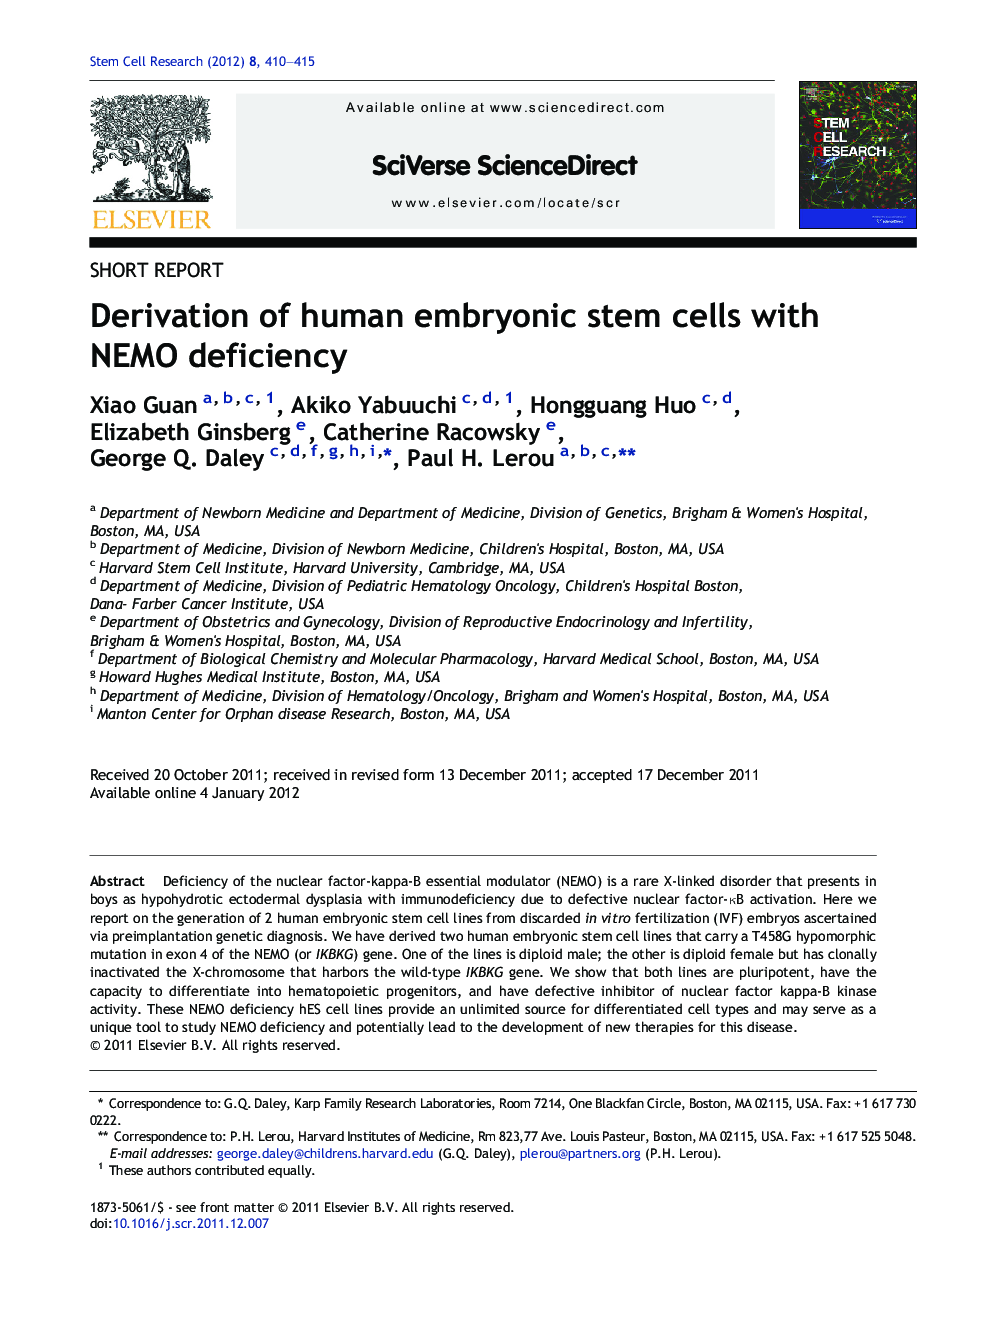 Derivation of human embryonic stem cells with NEMO deficiency